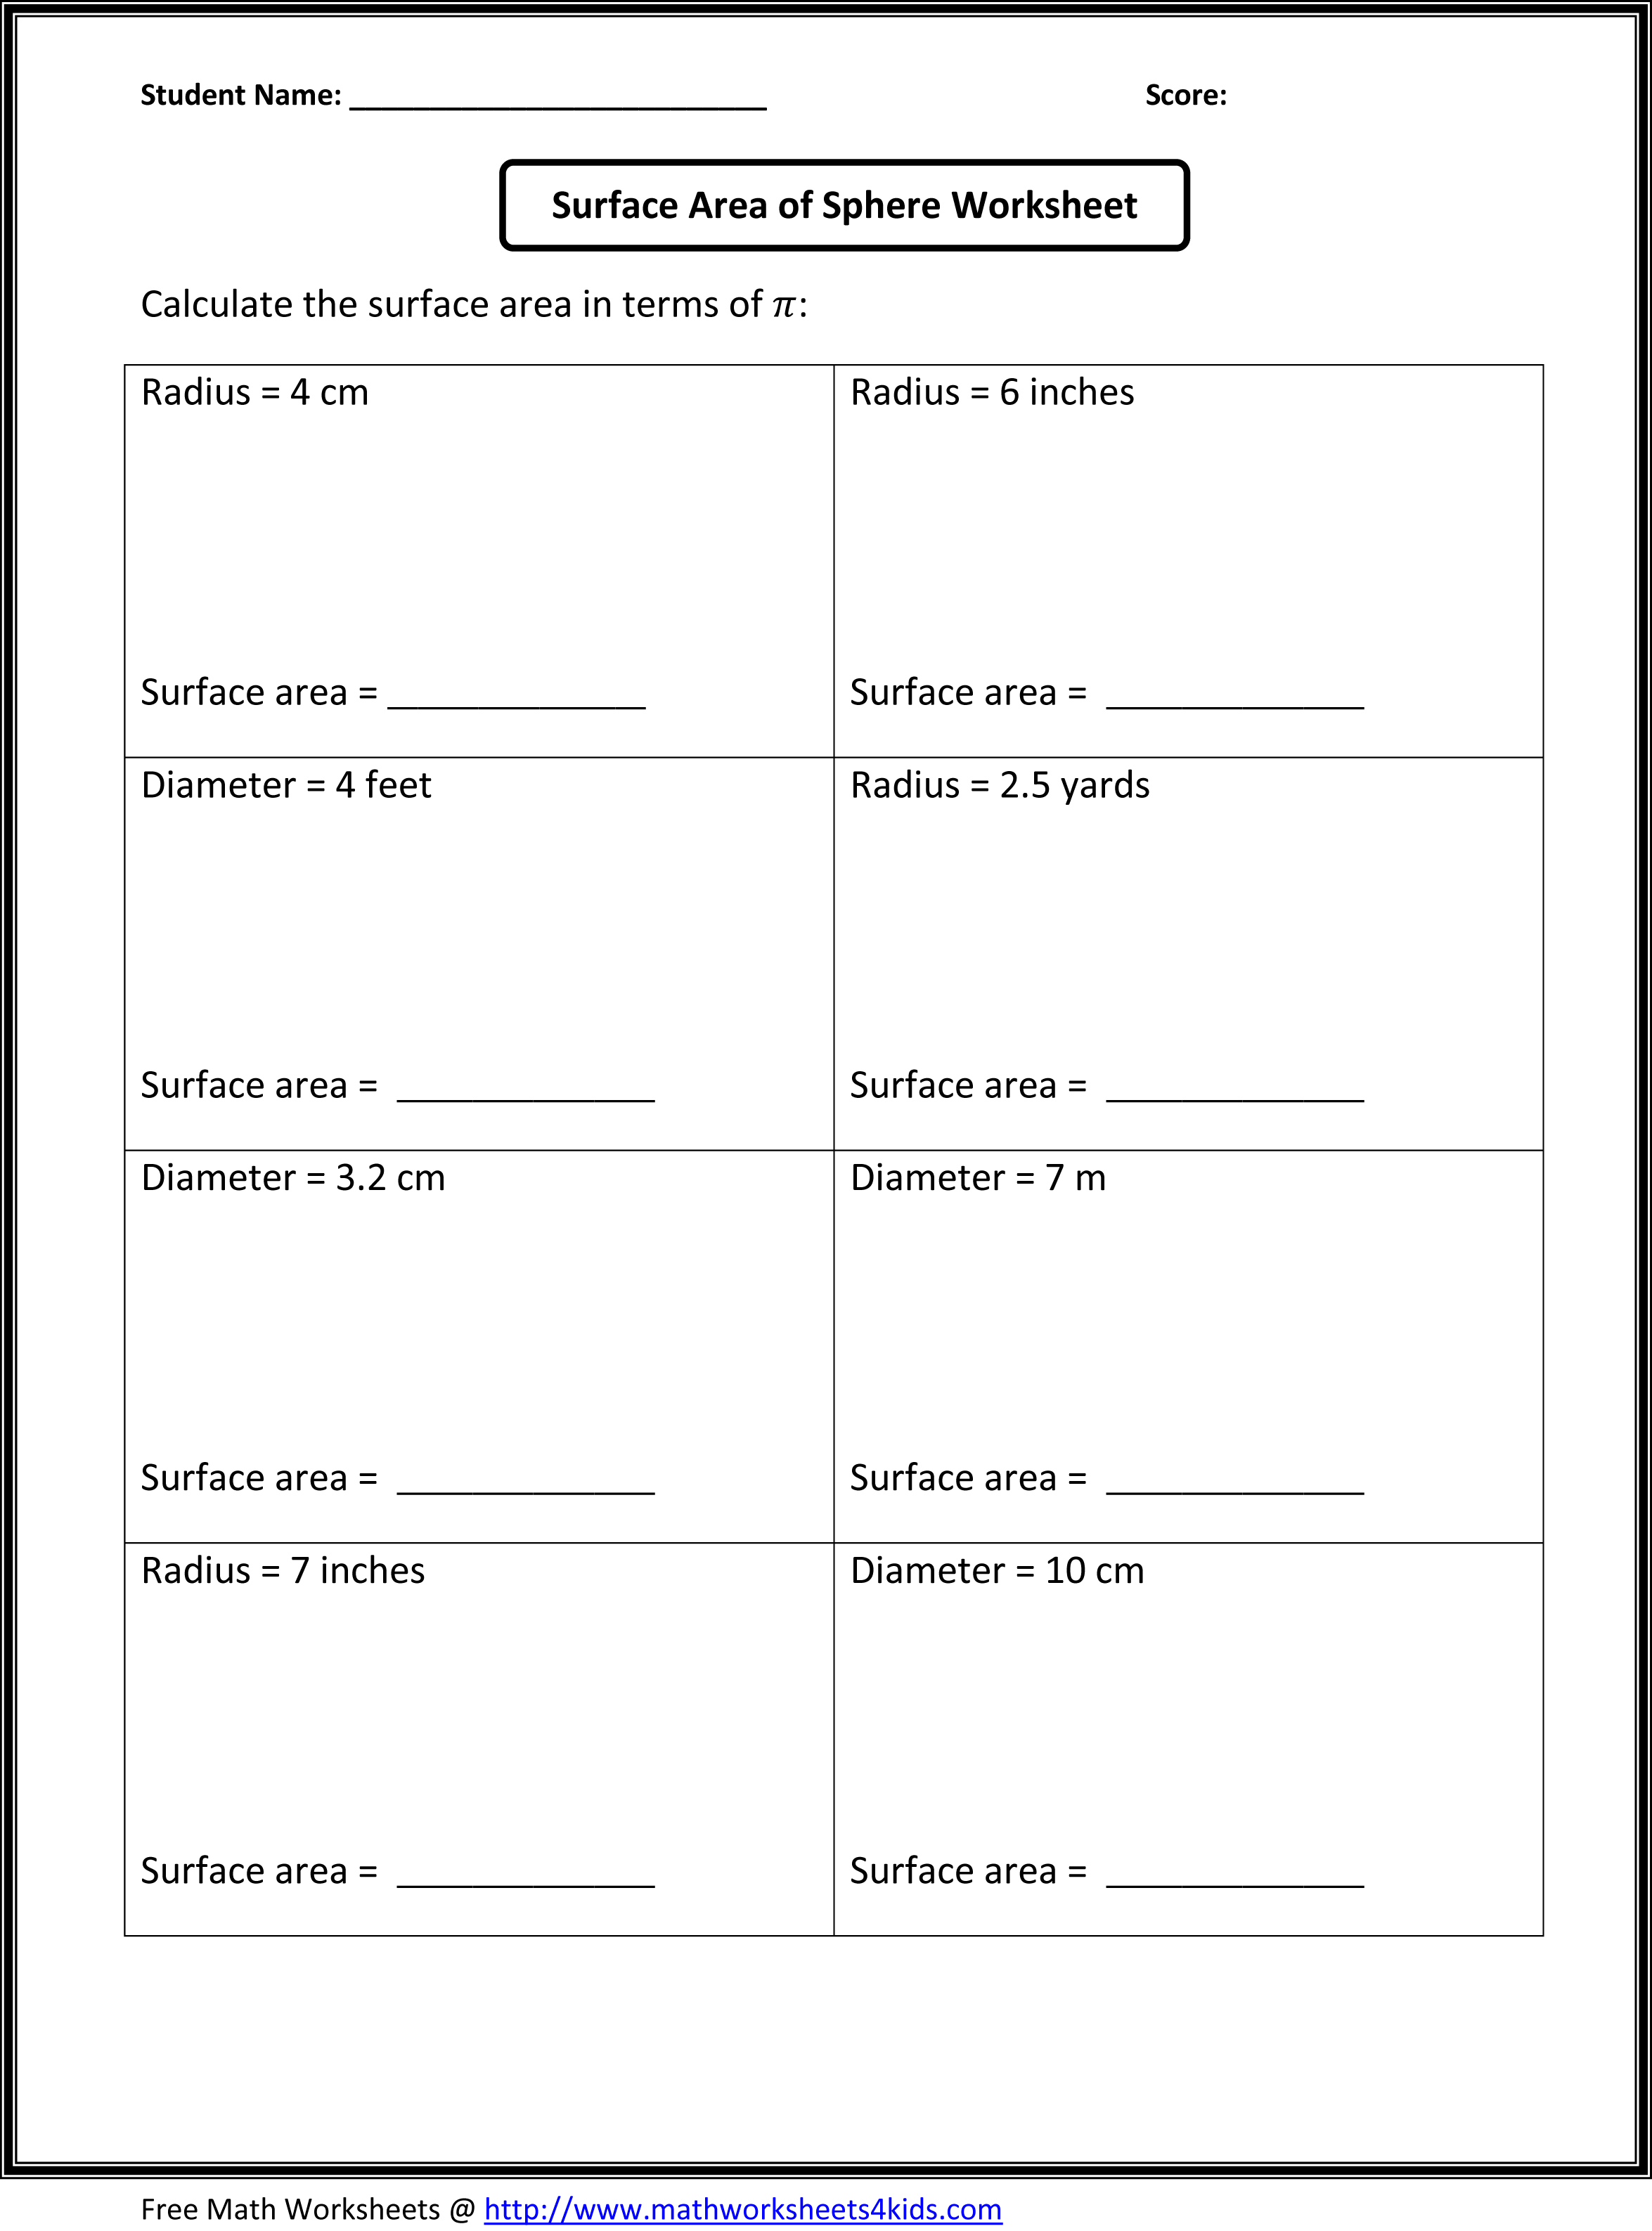 Surface Area of a Sphere Worksheet